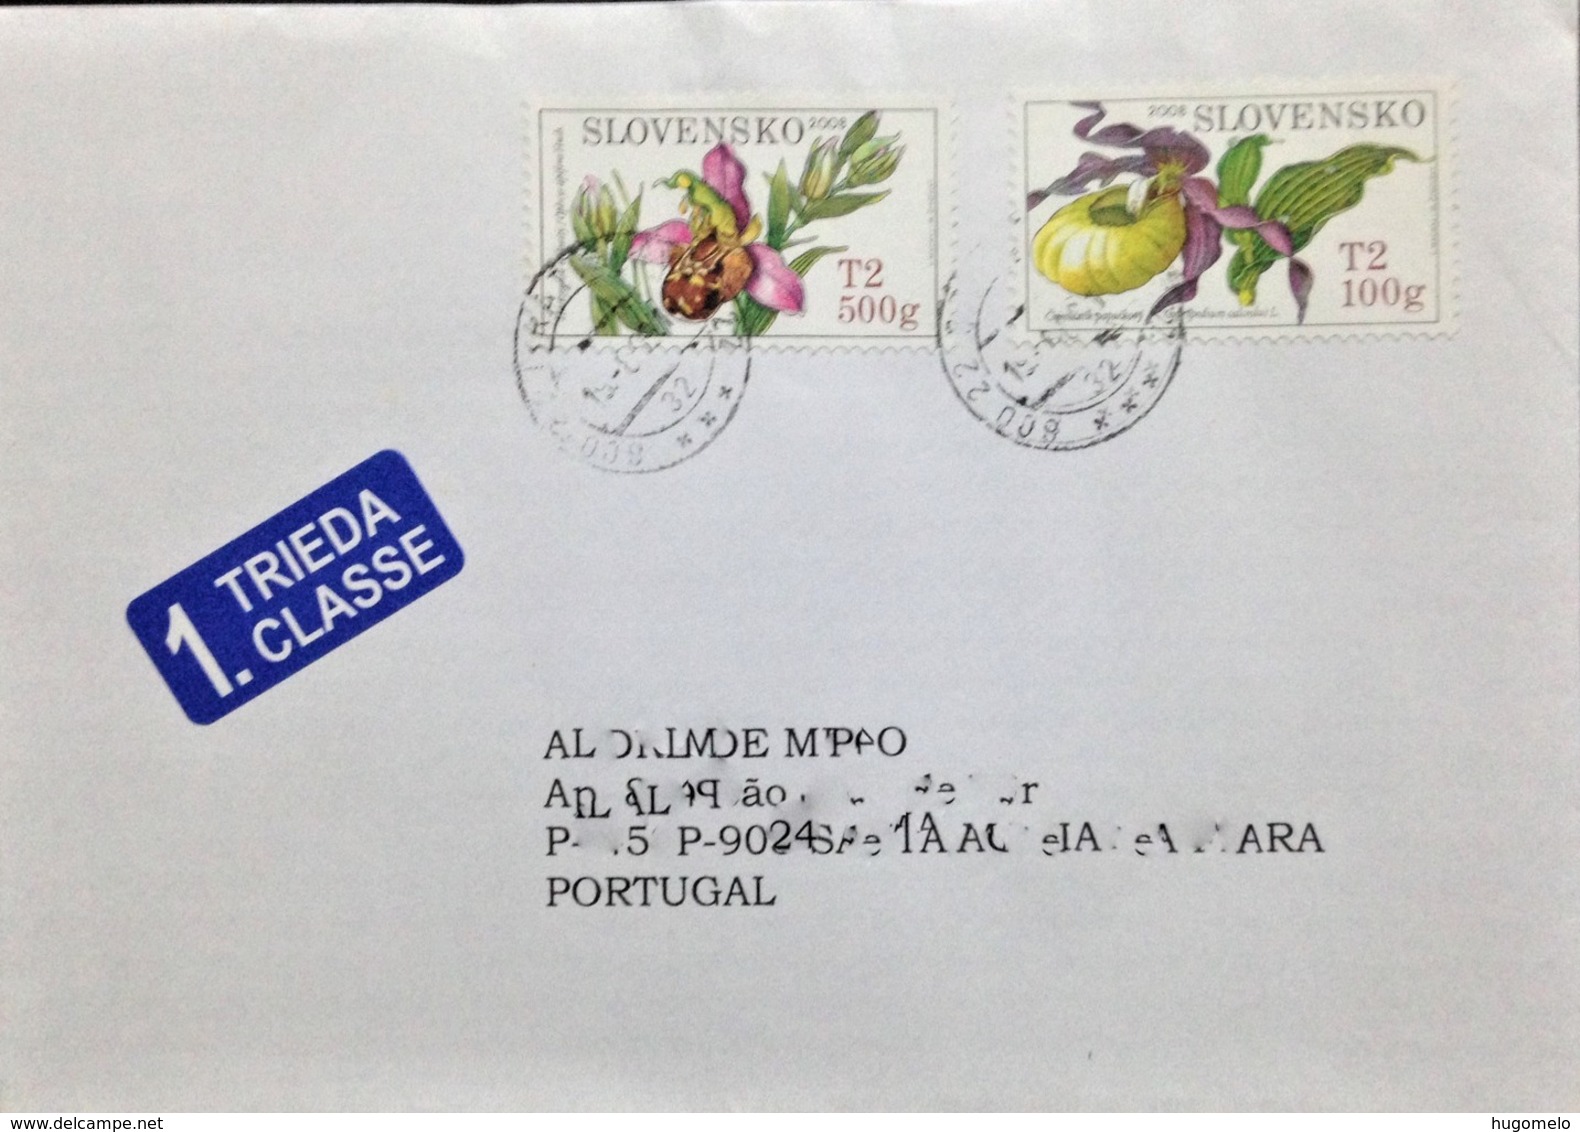 Slovakia, Circulated Cover To Portugal, "Nature", "Flora", Flowers", "Orchids", 2009 - Briefe U. Dokumente